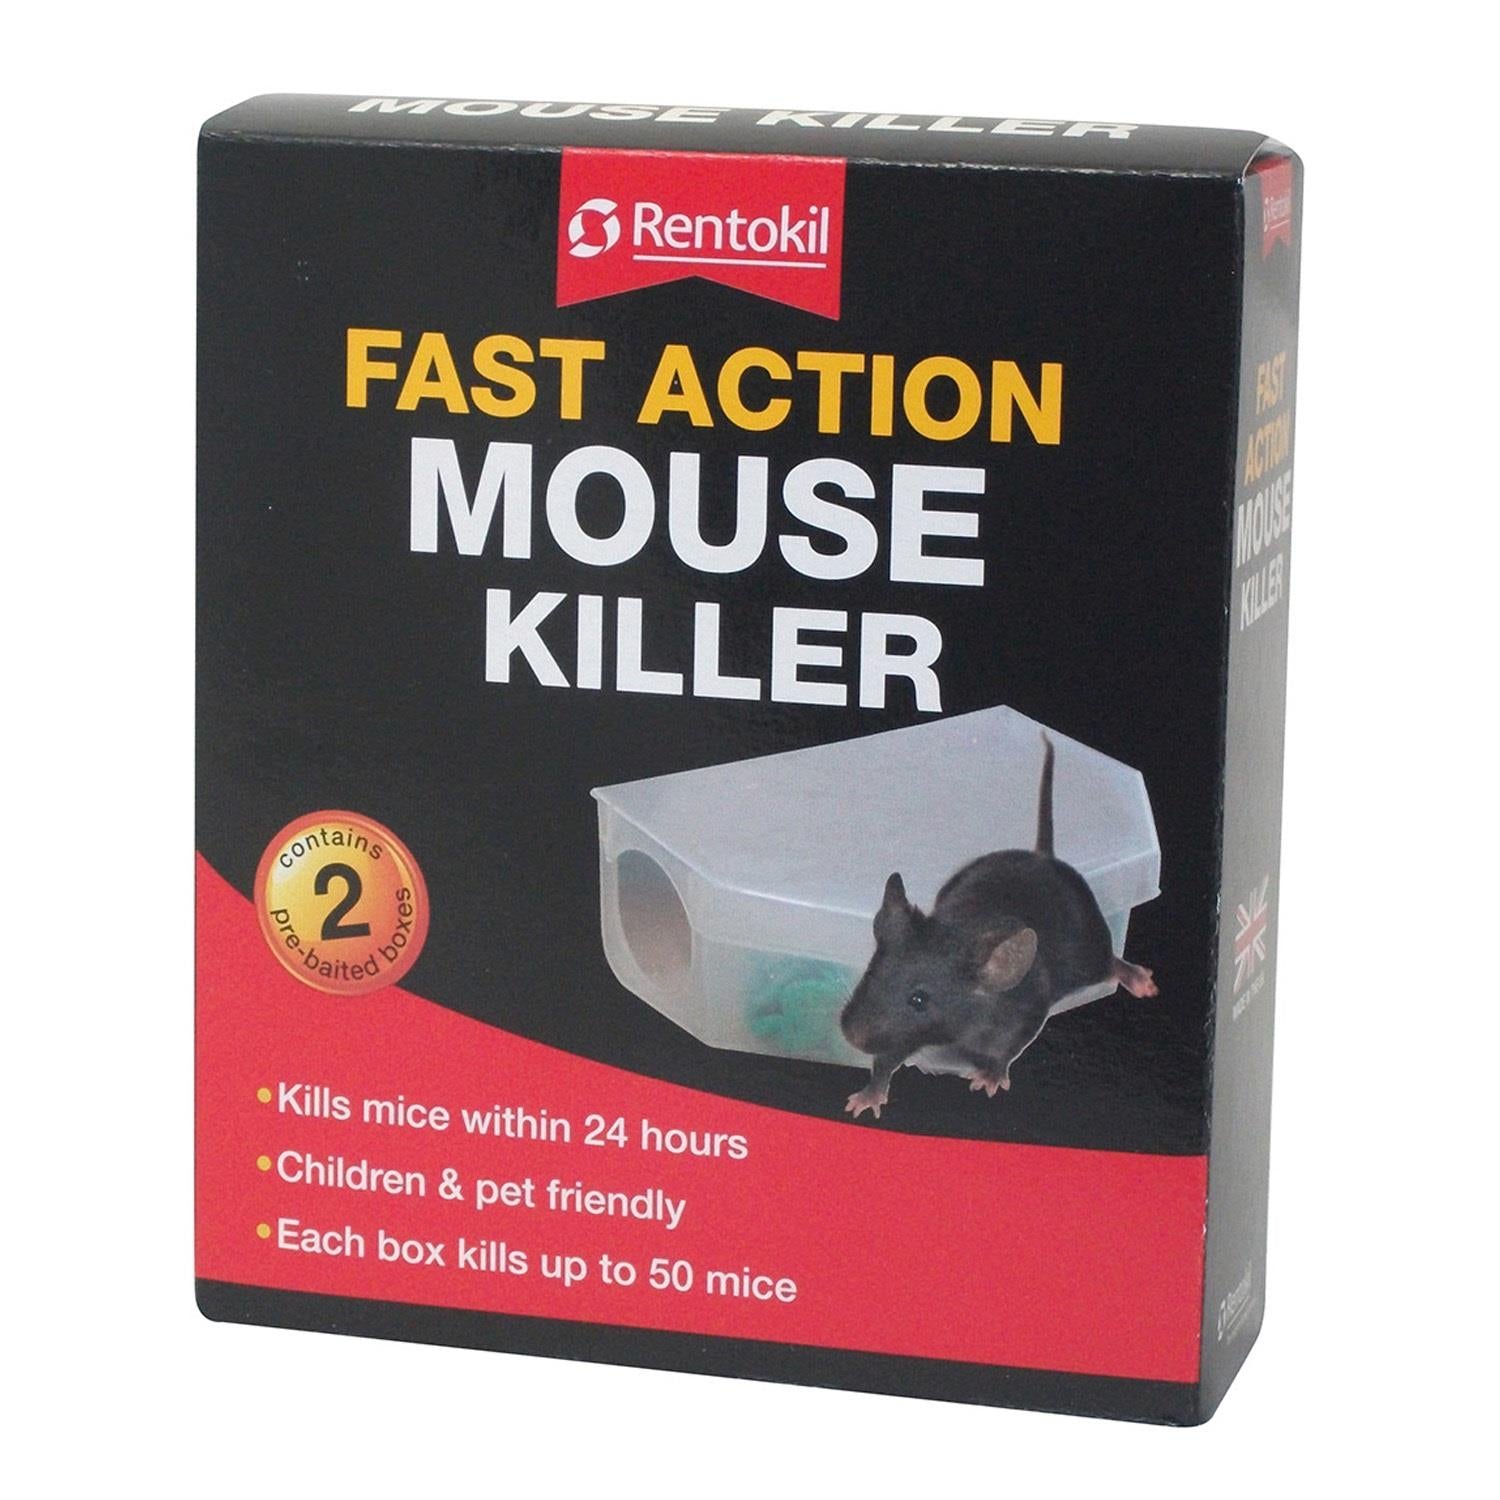 Rentokil Fast Action Mouse Killer - Just Horse Riders